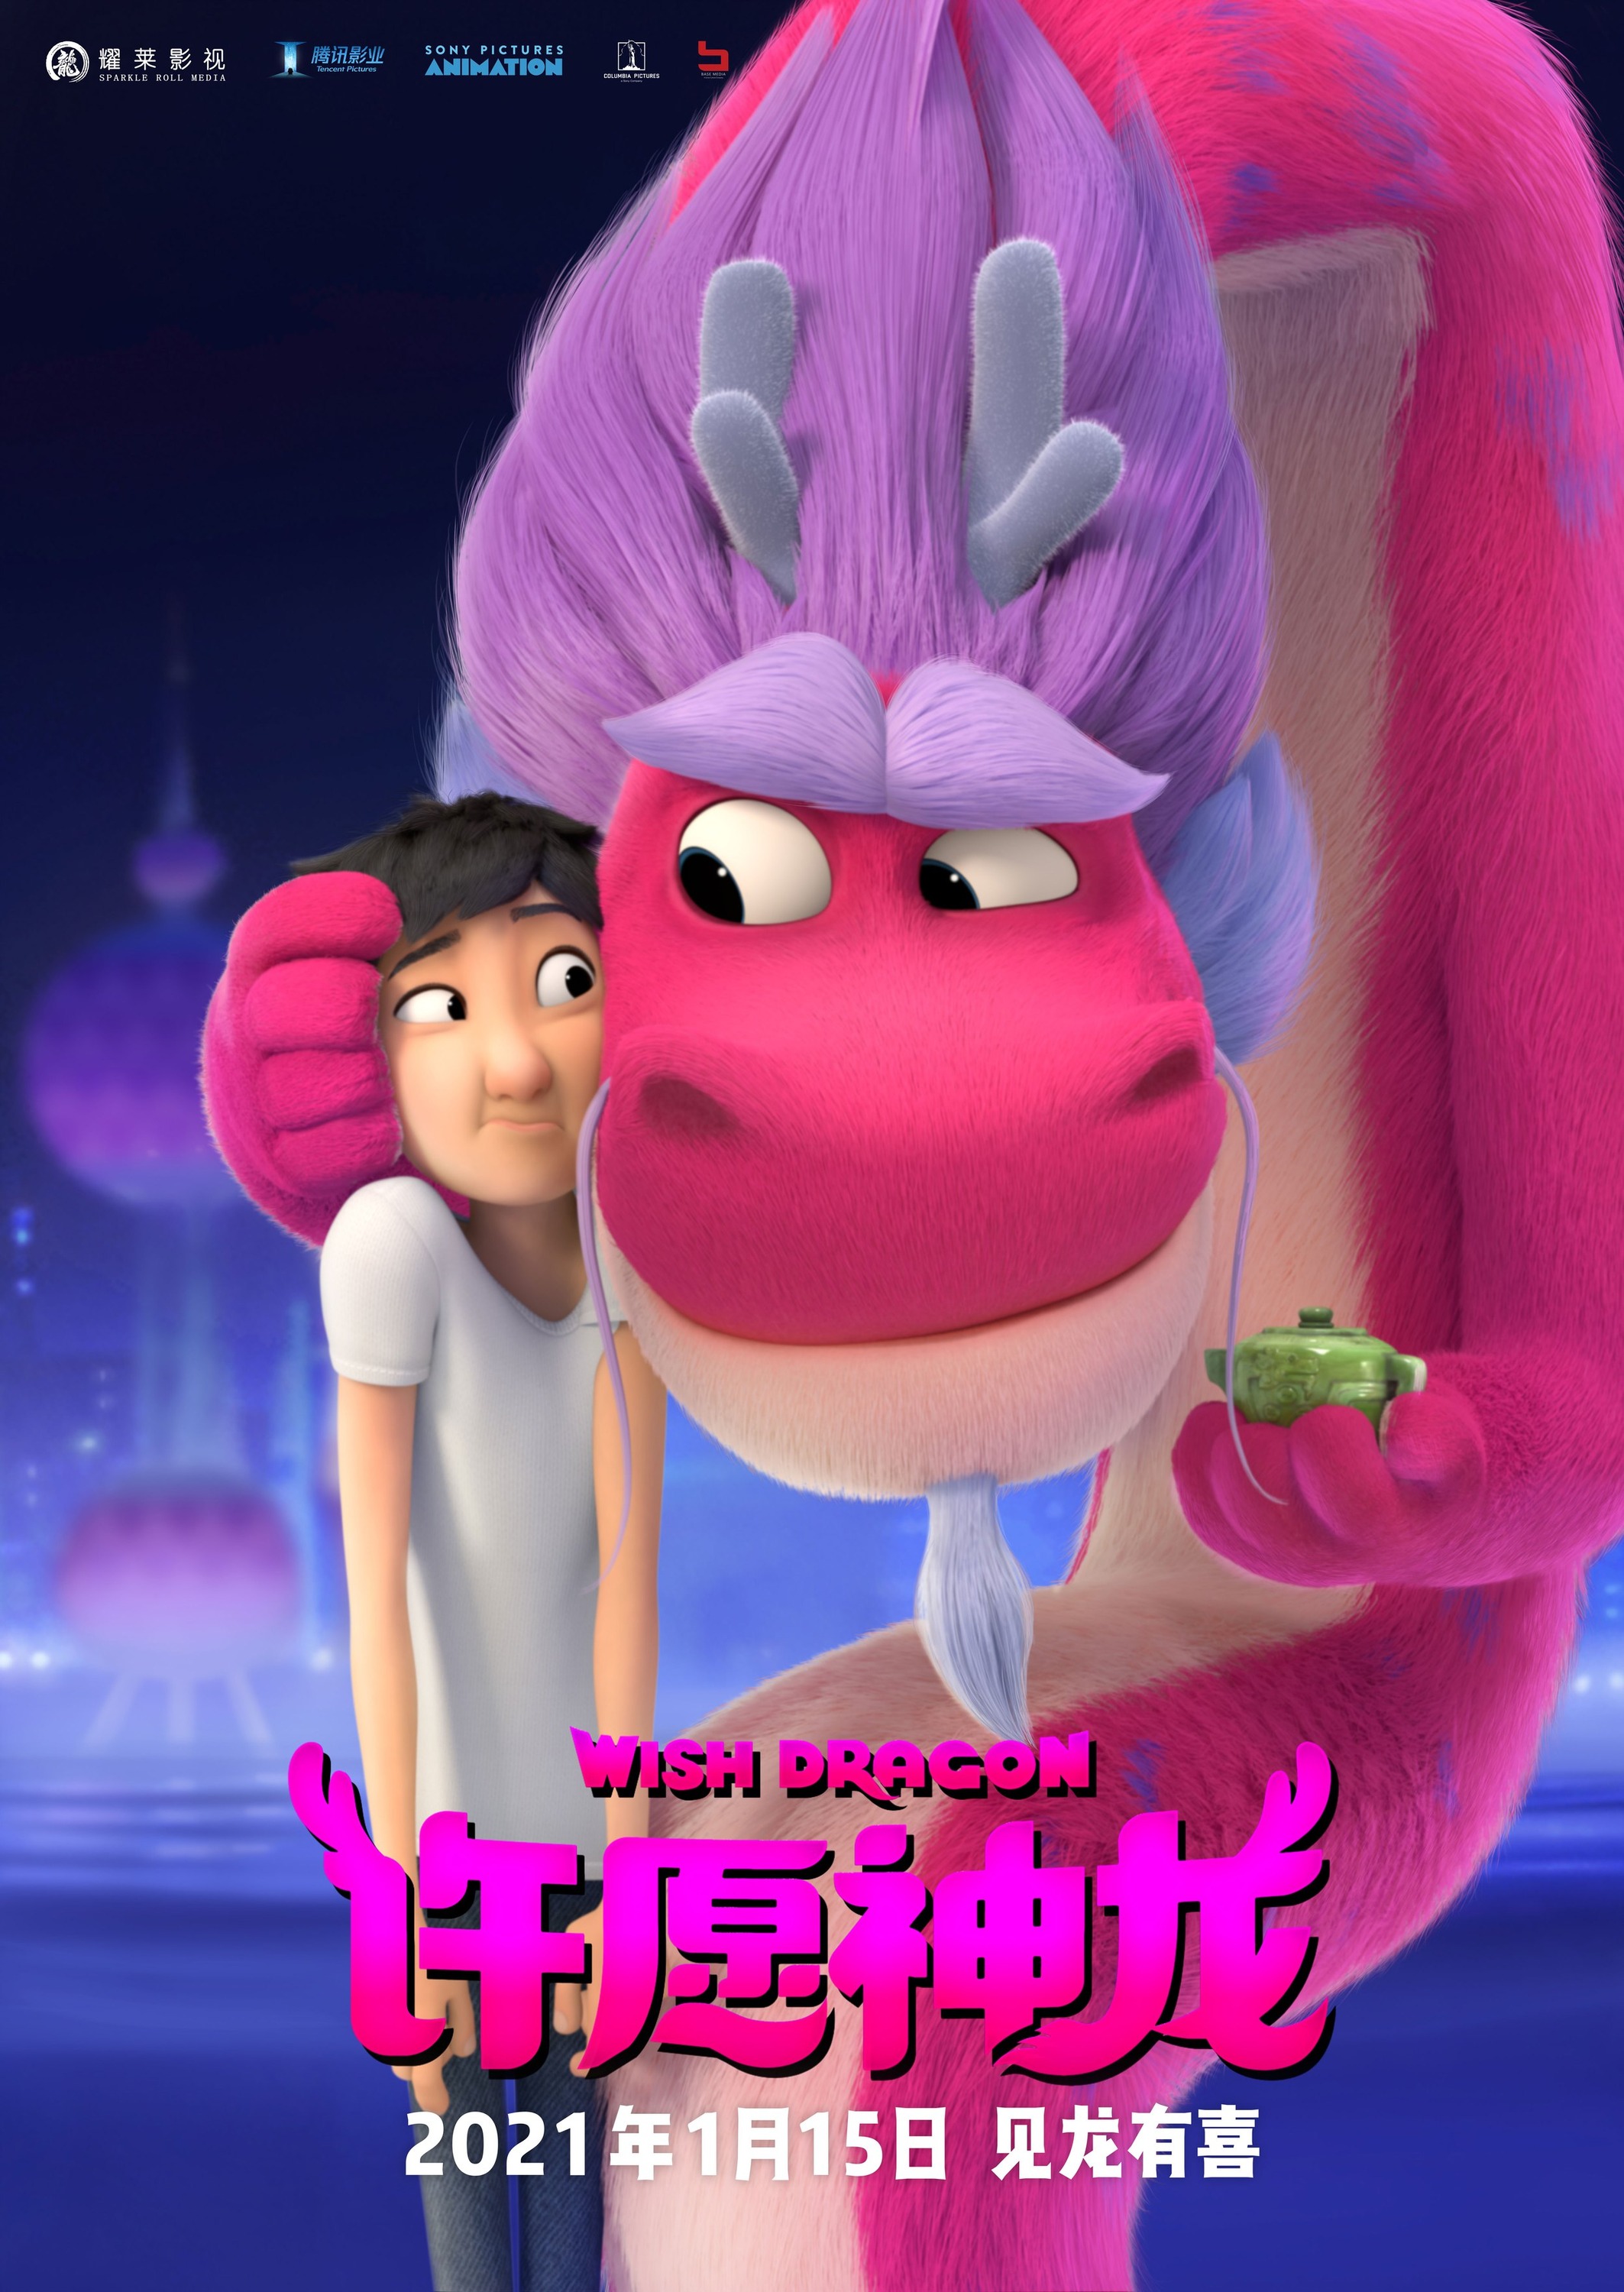 Mega Sized Movie Poster Image for Wish Dragon (#3 of 3)